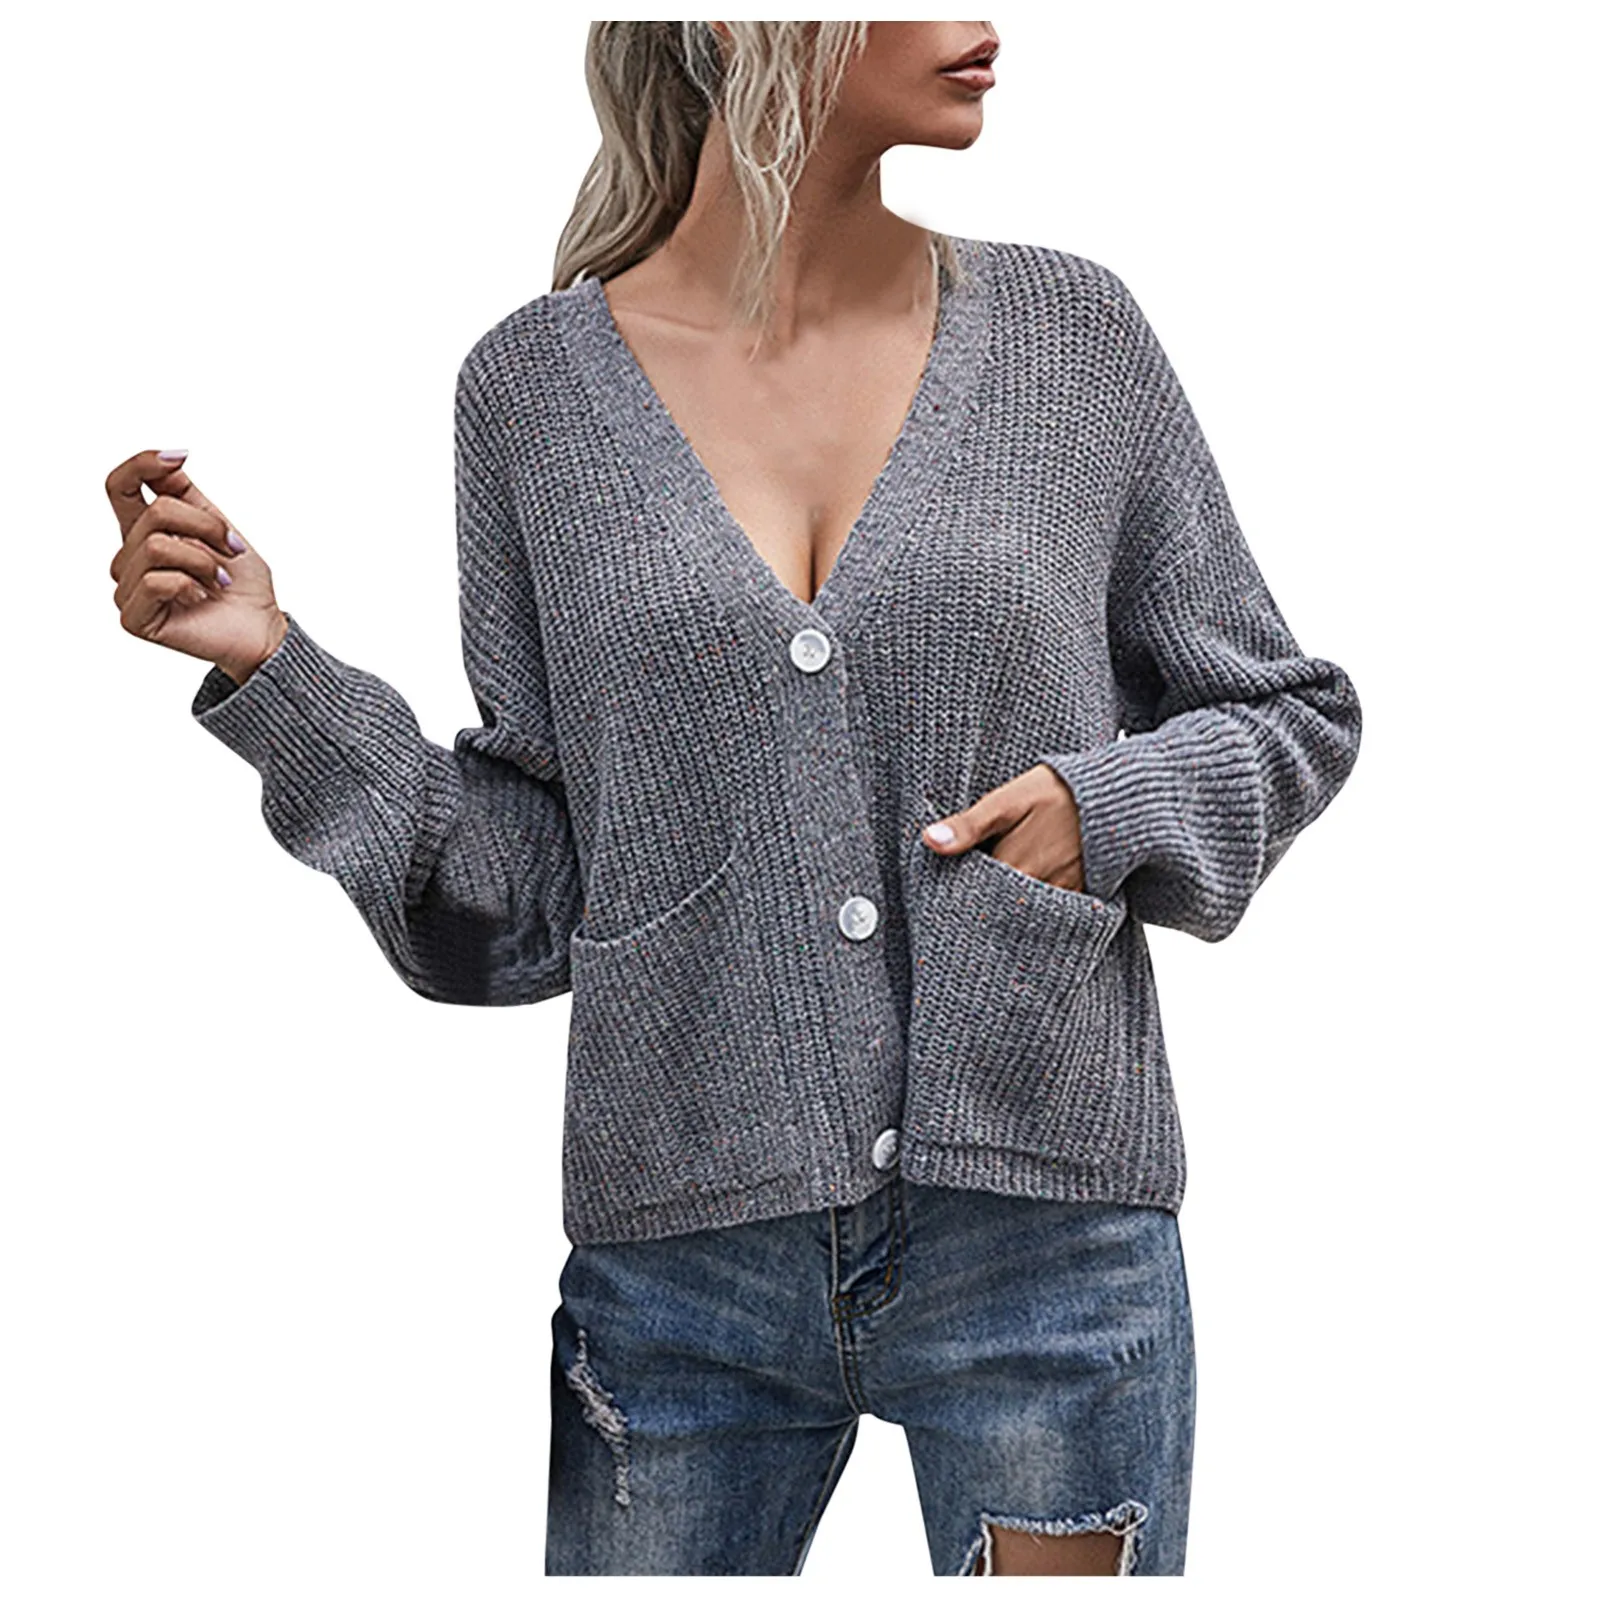 

Korean Style Cardigan Women Deep V Neck Knitted Sweater Jacket Coat Long Sleeve Tops Single Breasted Polka Dot Casual Cardigans